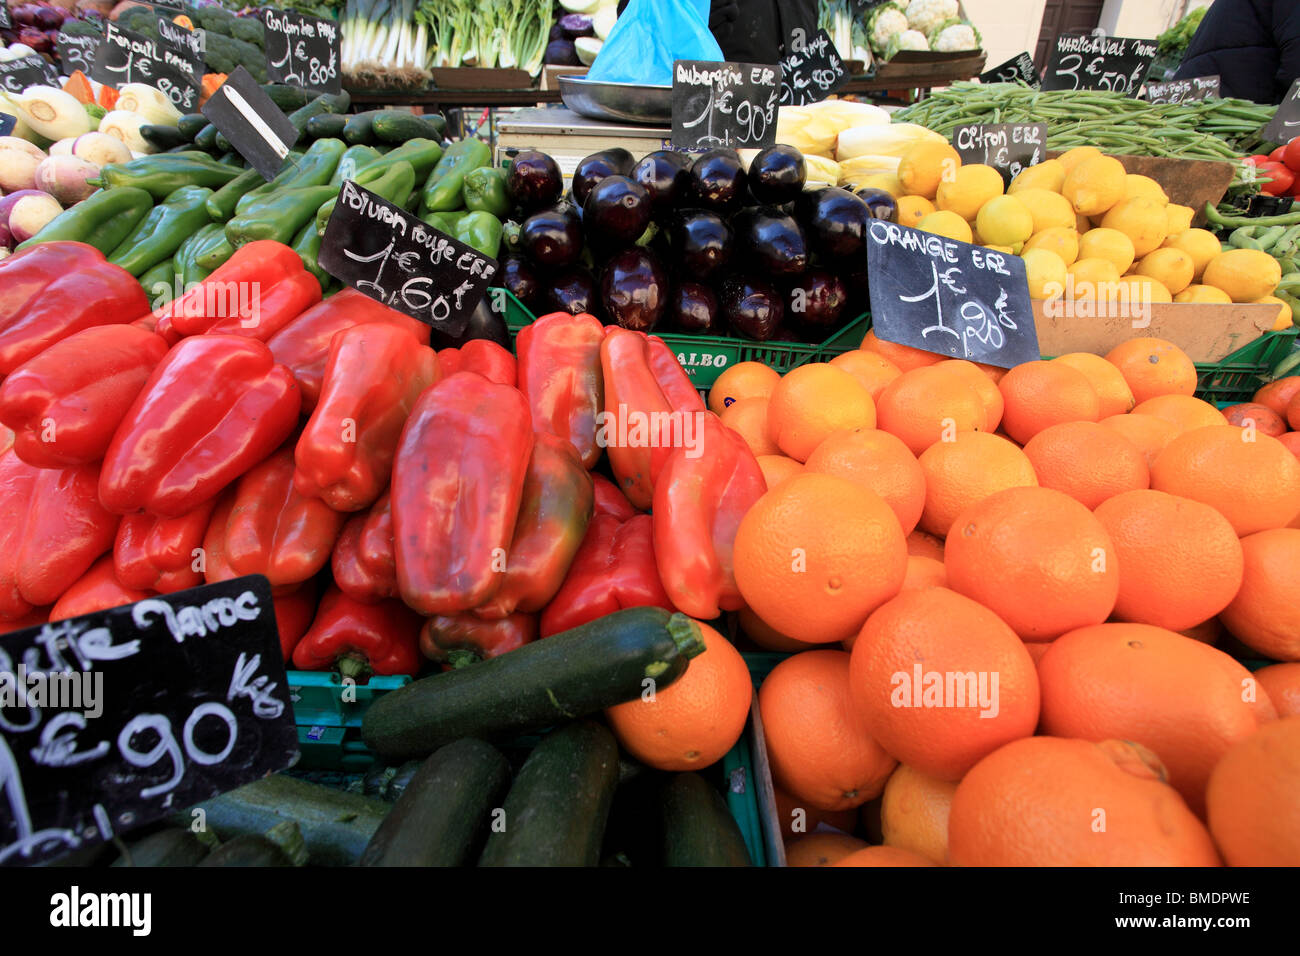 The popular Noailles market in the city of Marseille Stock Photo